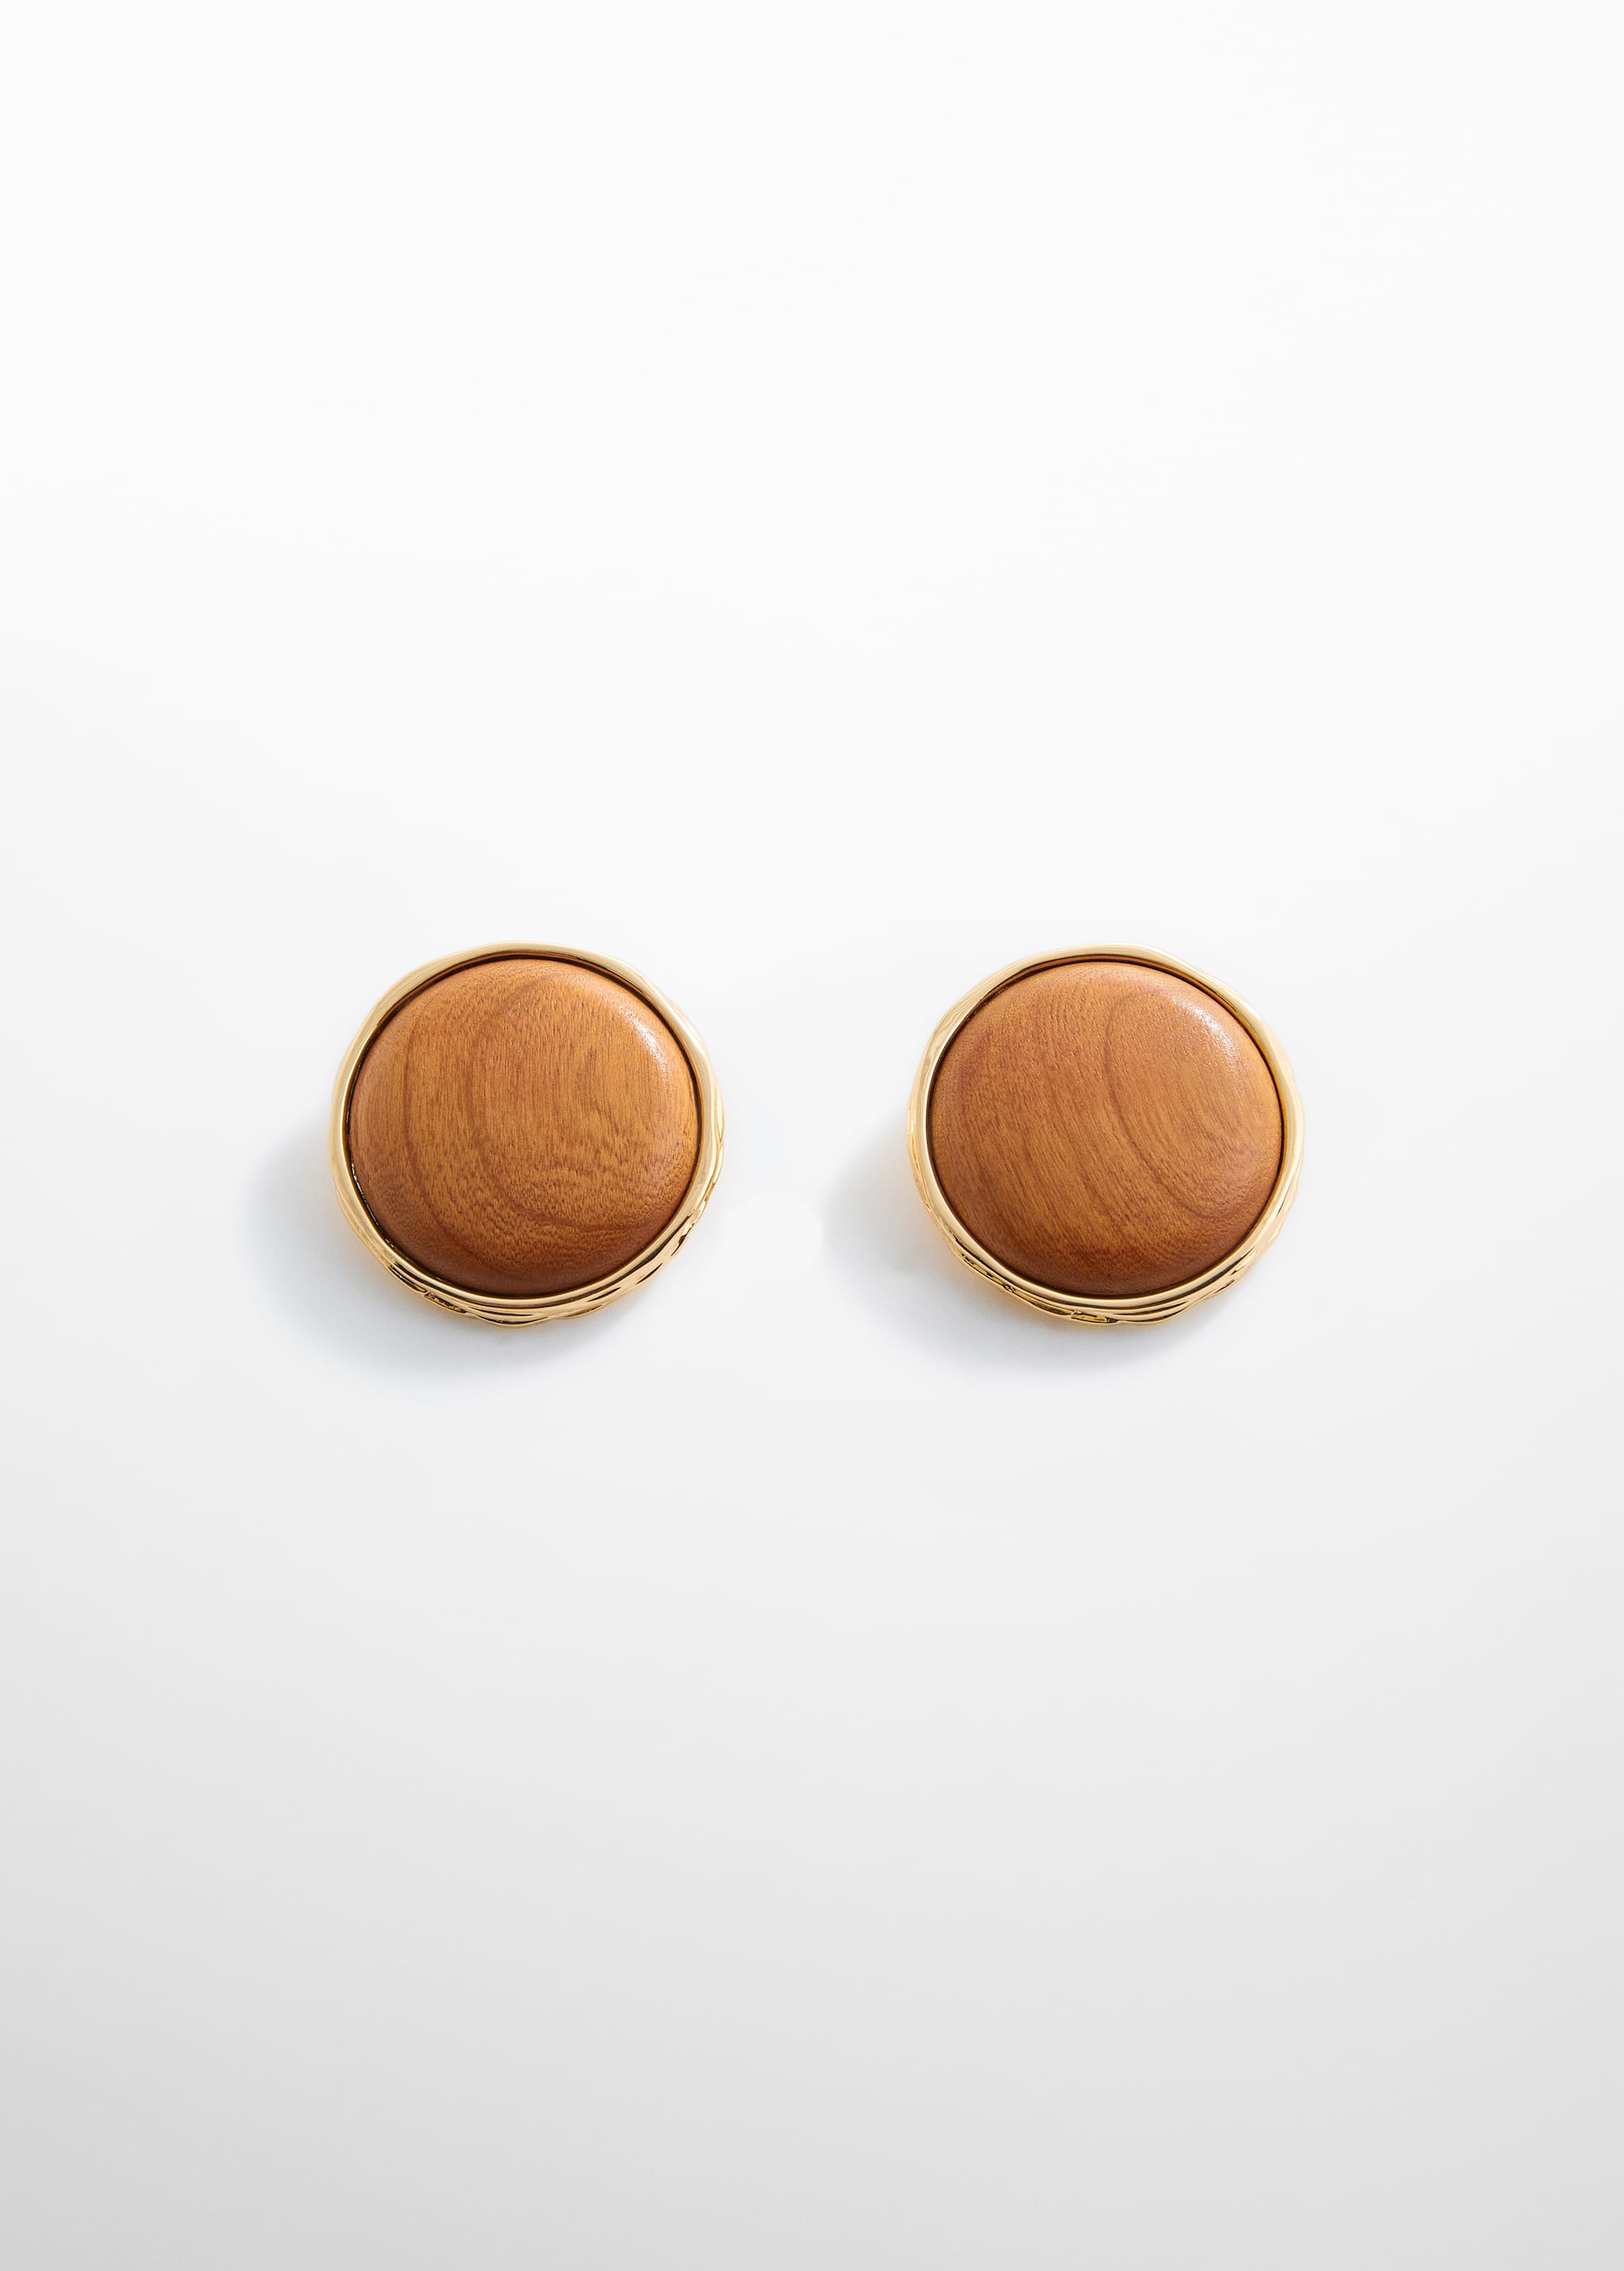 Wooden earrings with circular design - Article without model